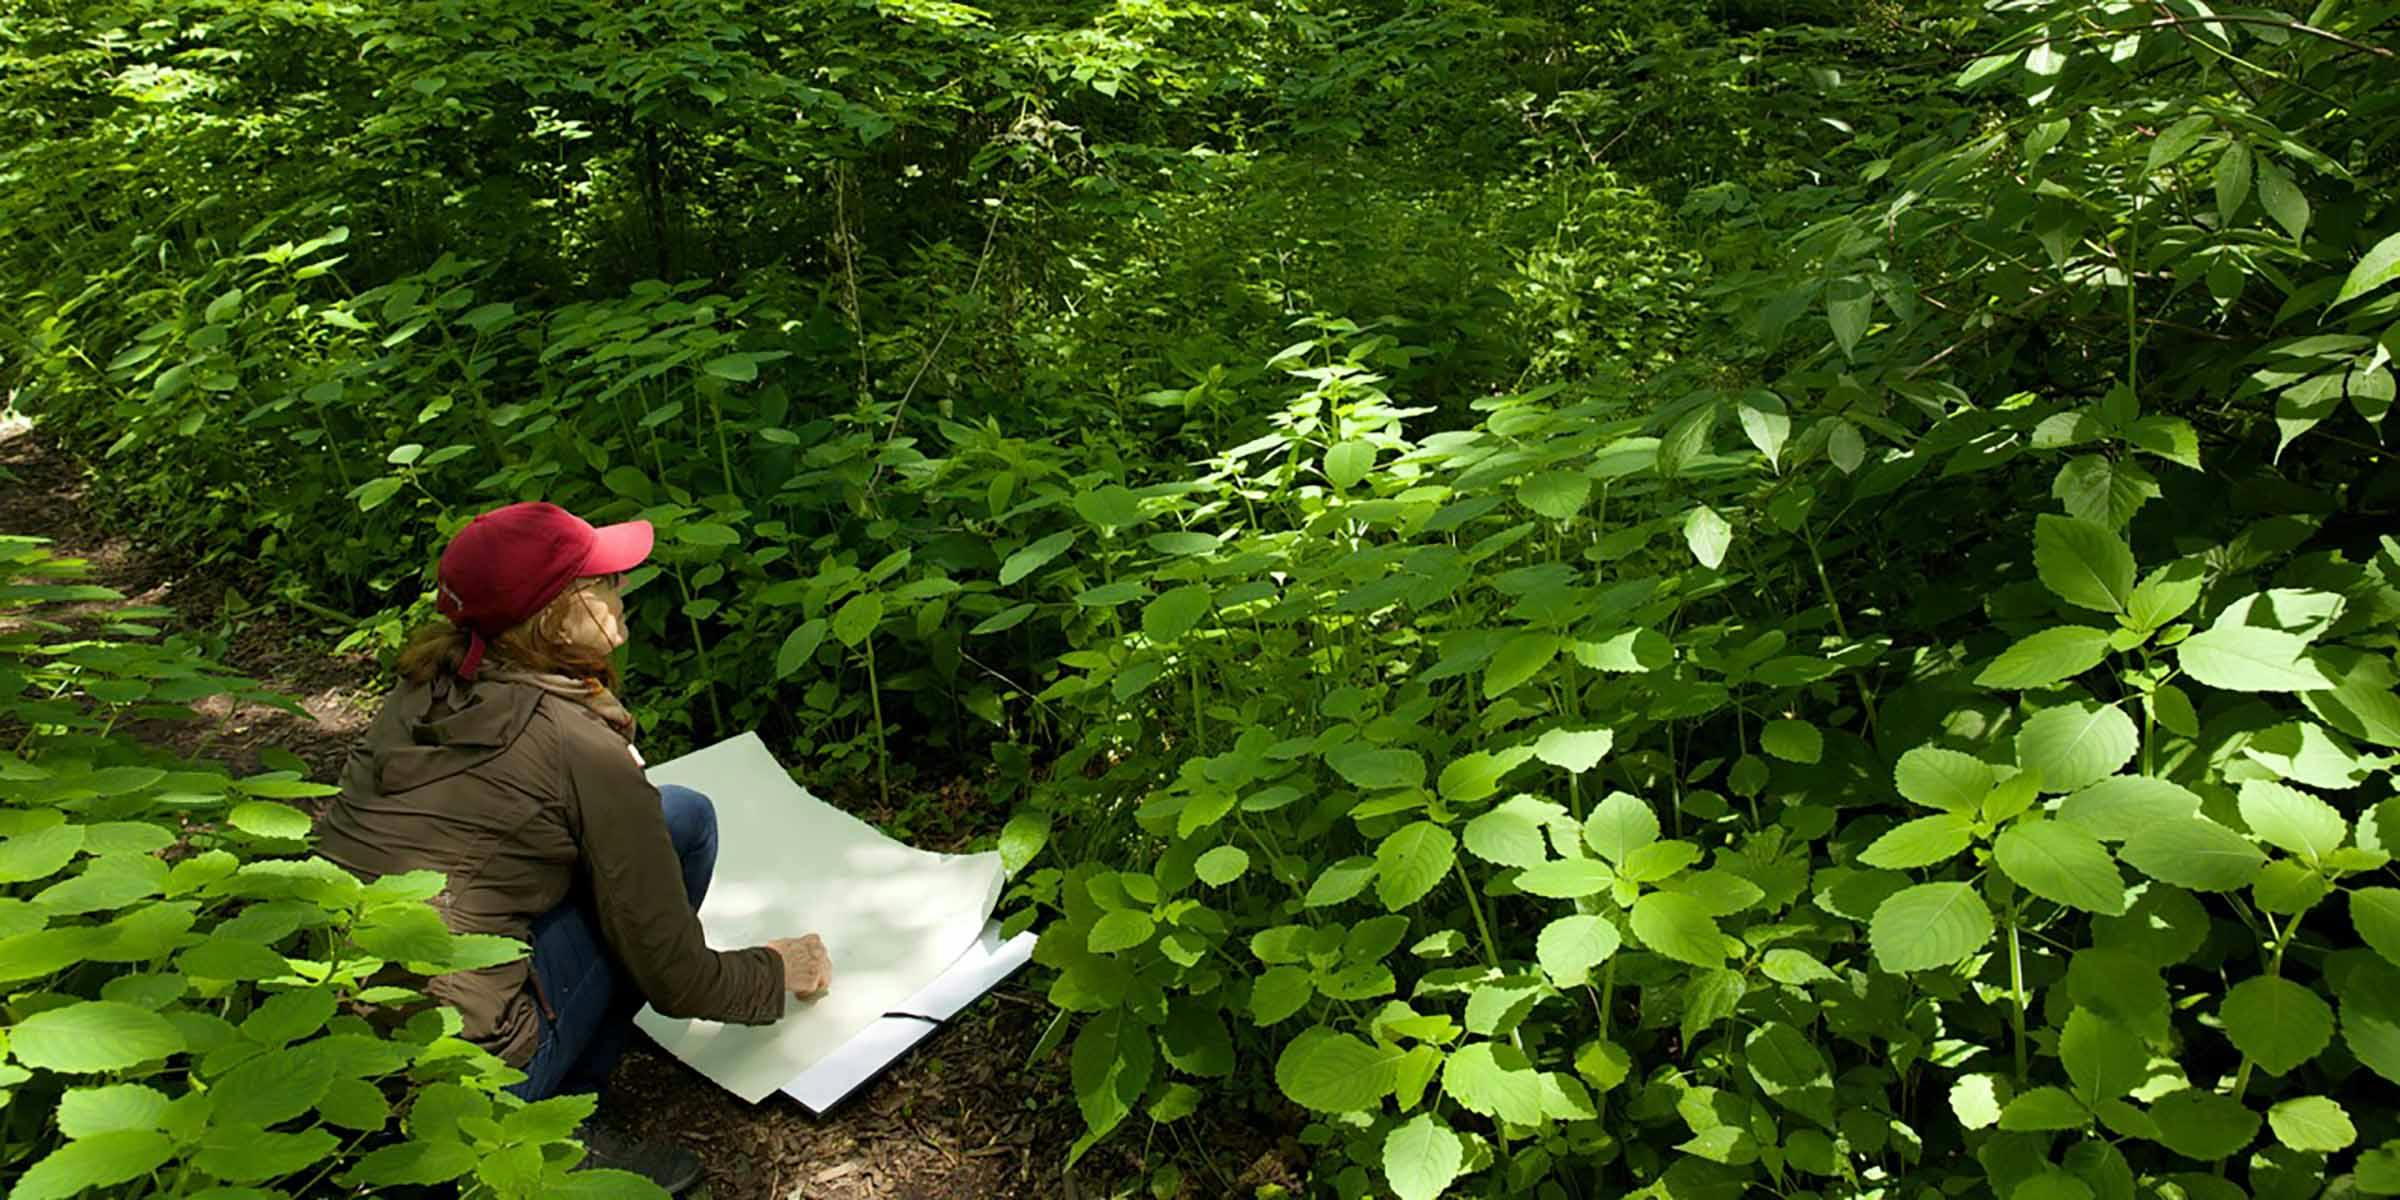 A woman drawing on a large sheet of paper, in a forest of bright green, leafy plants